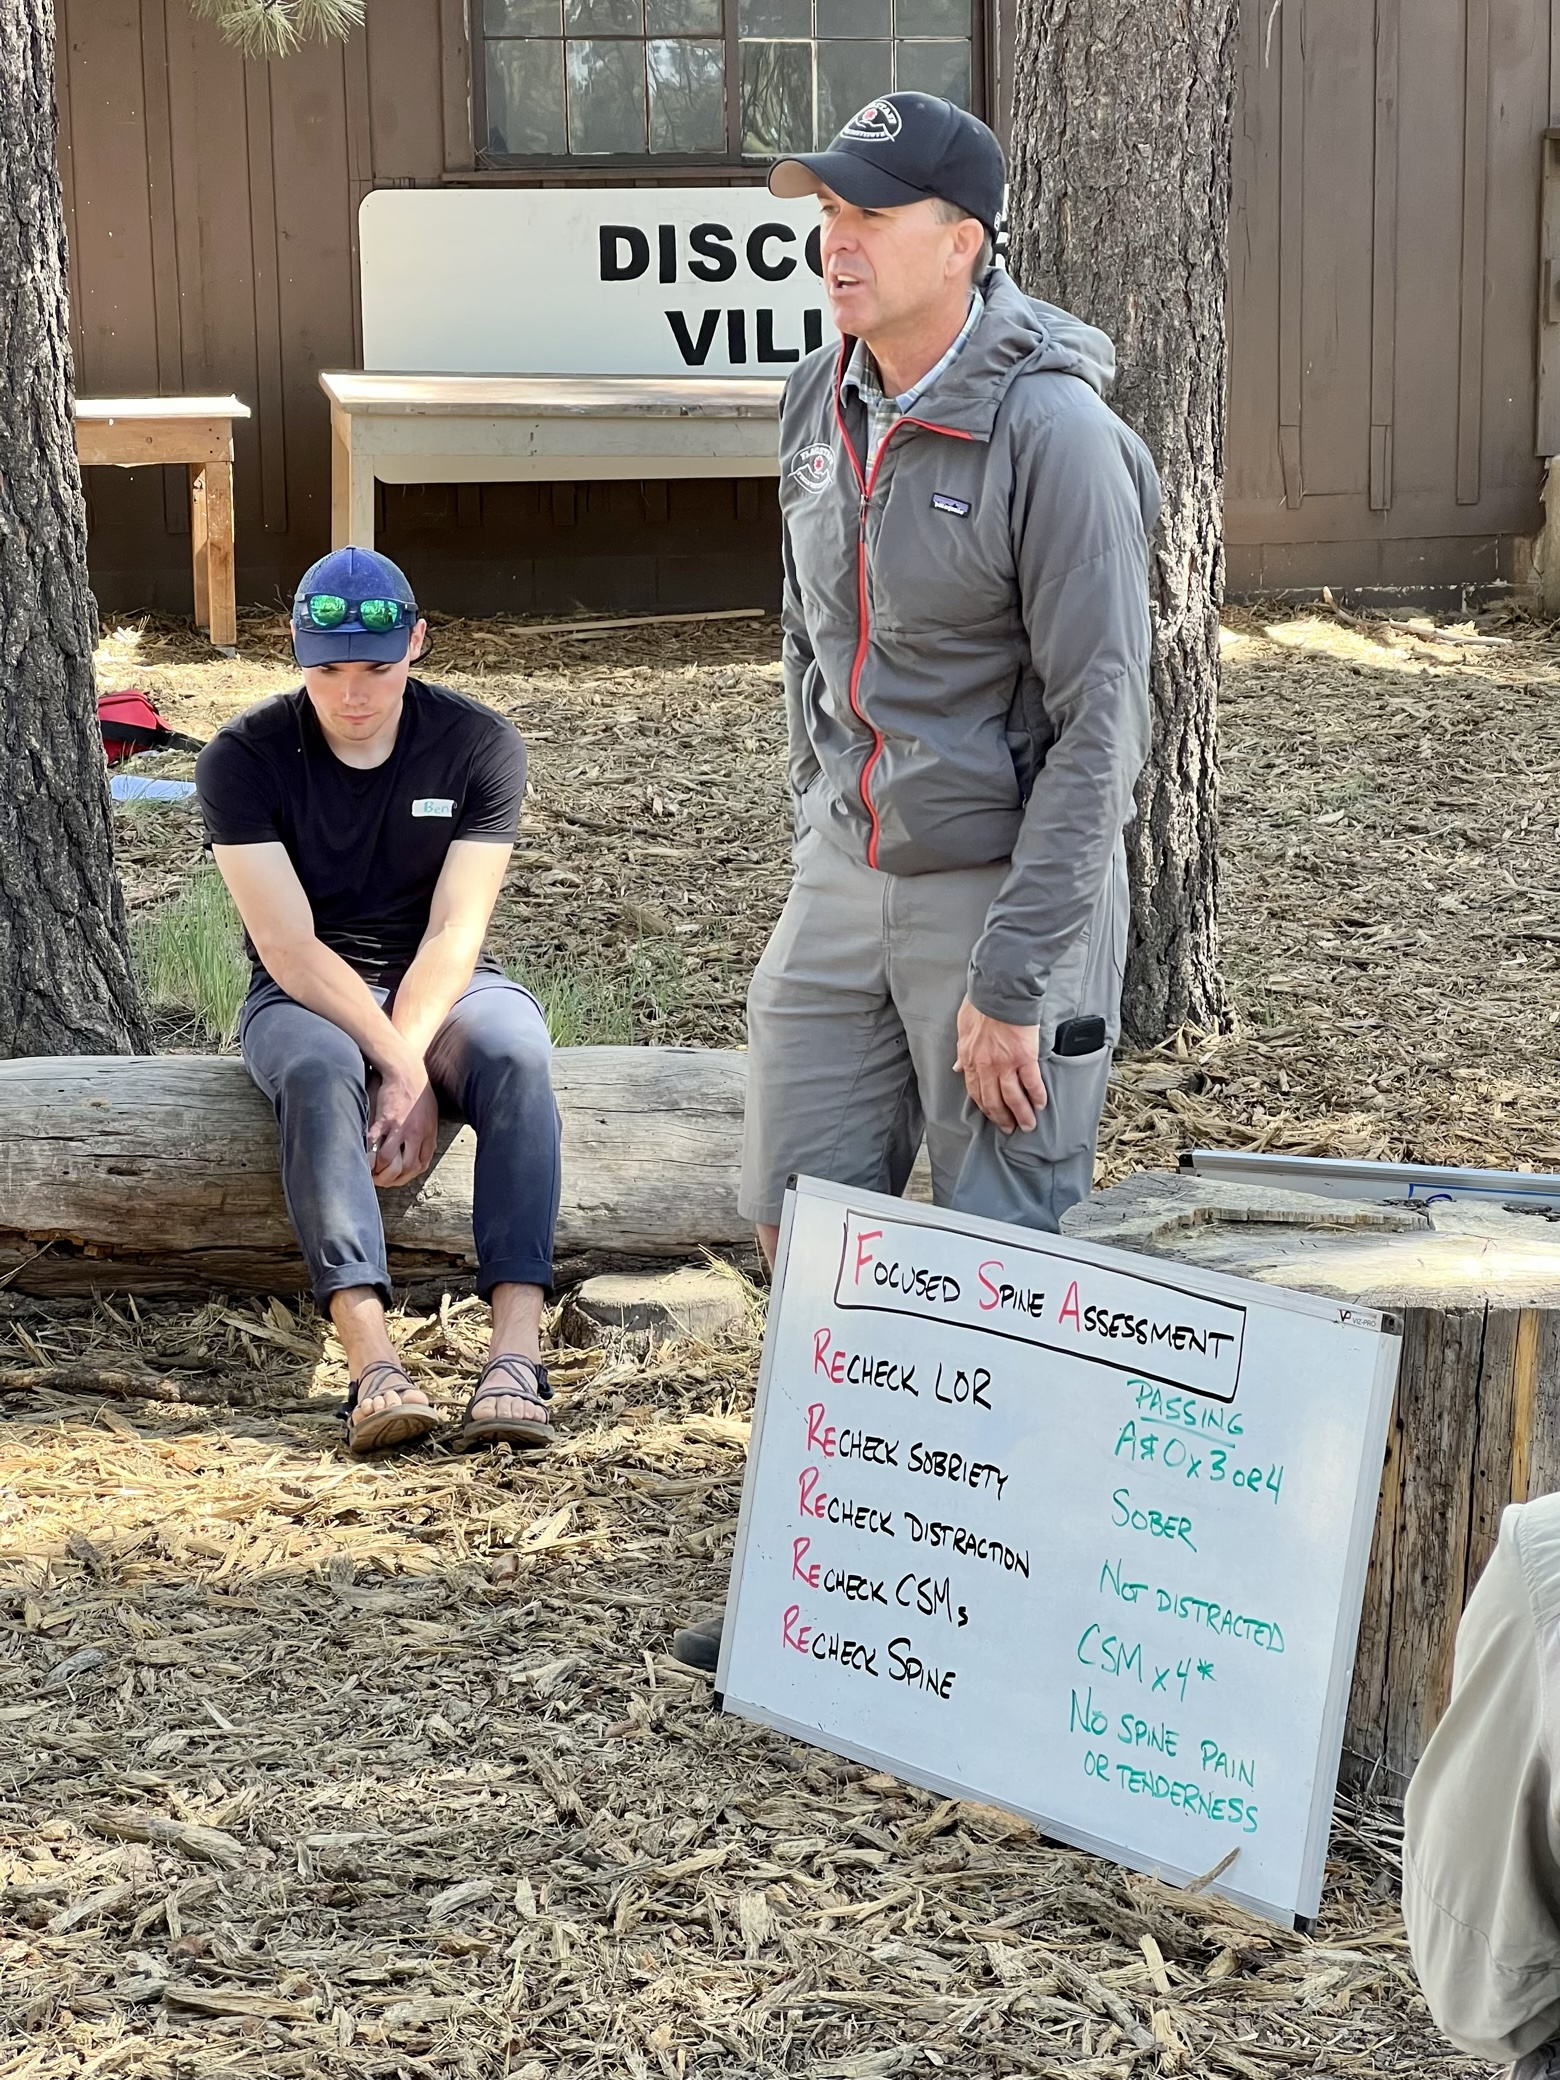 Pete of the Flagstaff Field Institute detailing the Focused Spine Assessment at a hybrid Wilderness First Responder course